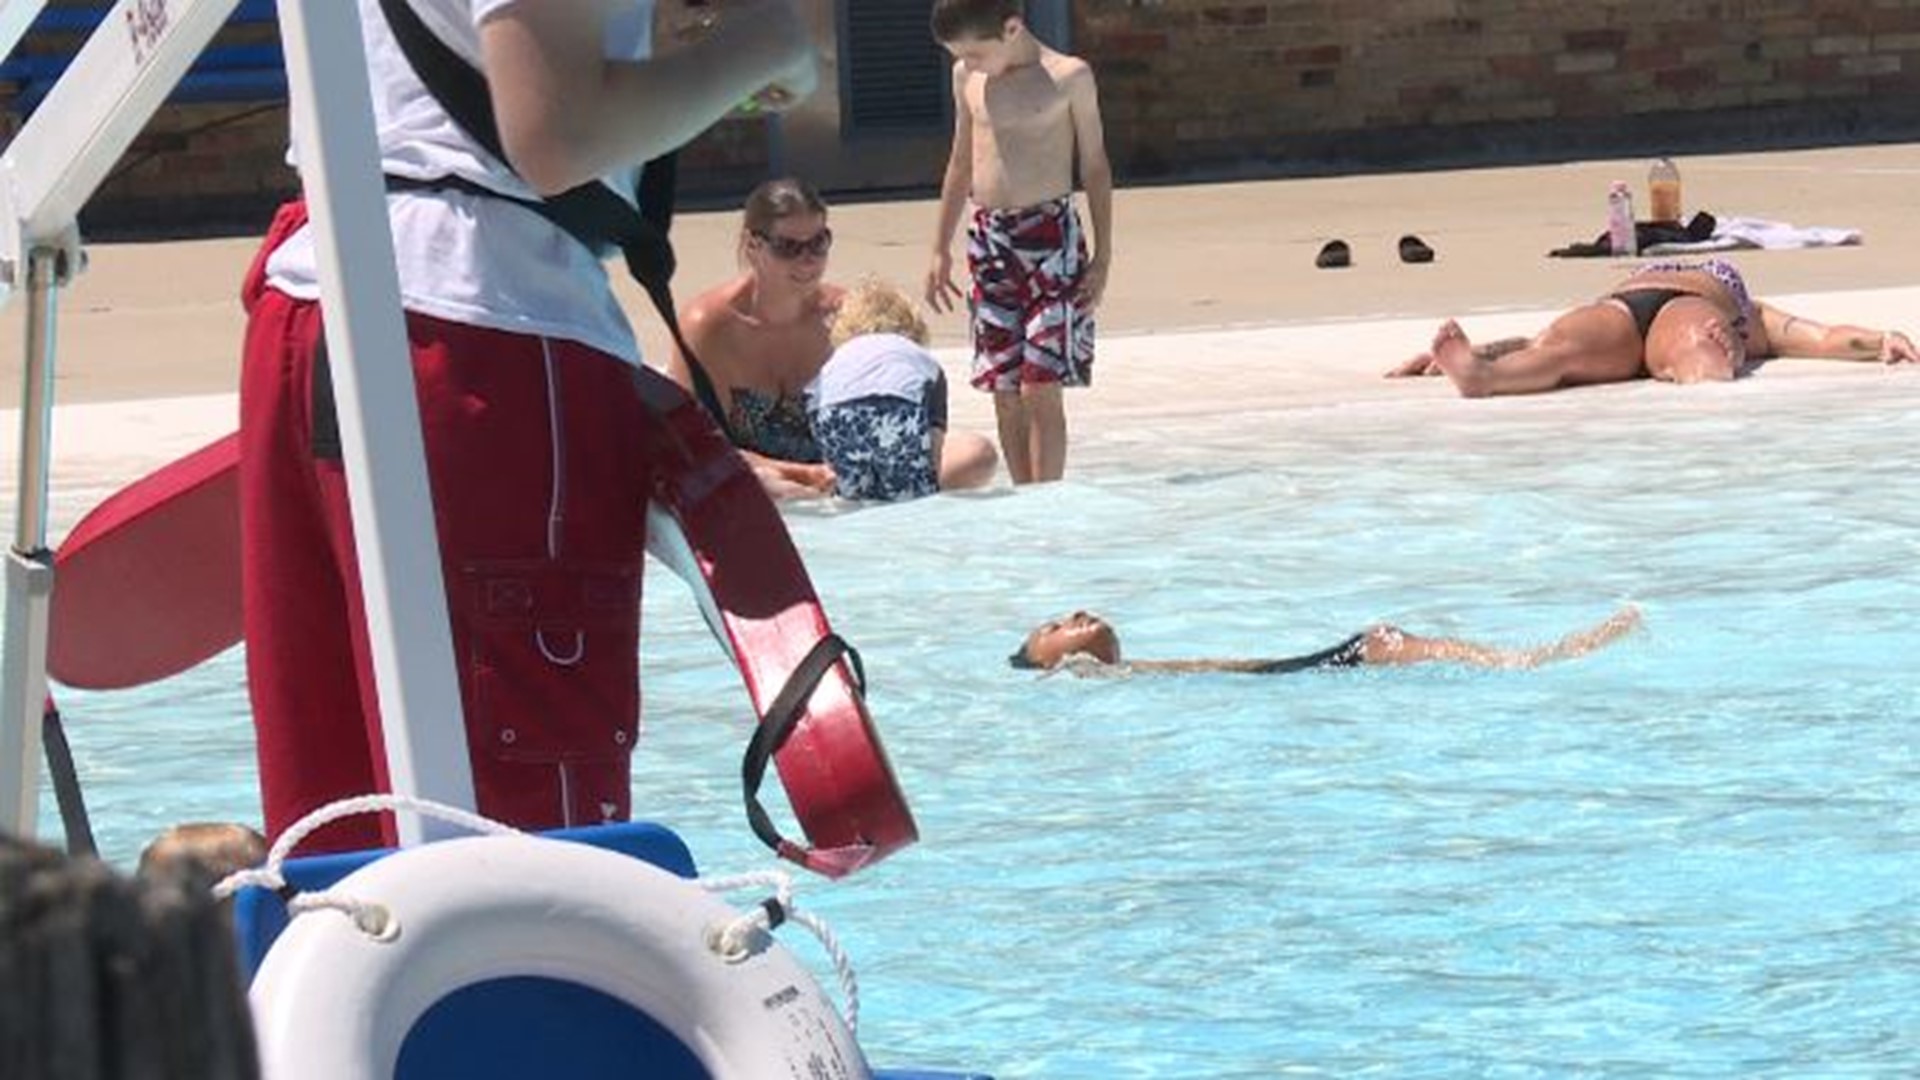 While some cities have struggled to hire enough lifeguards to operate their pools, Grand Rapids hasn't had that issue.